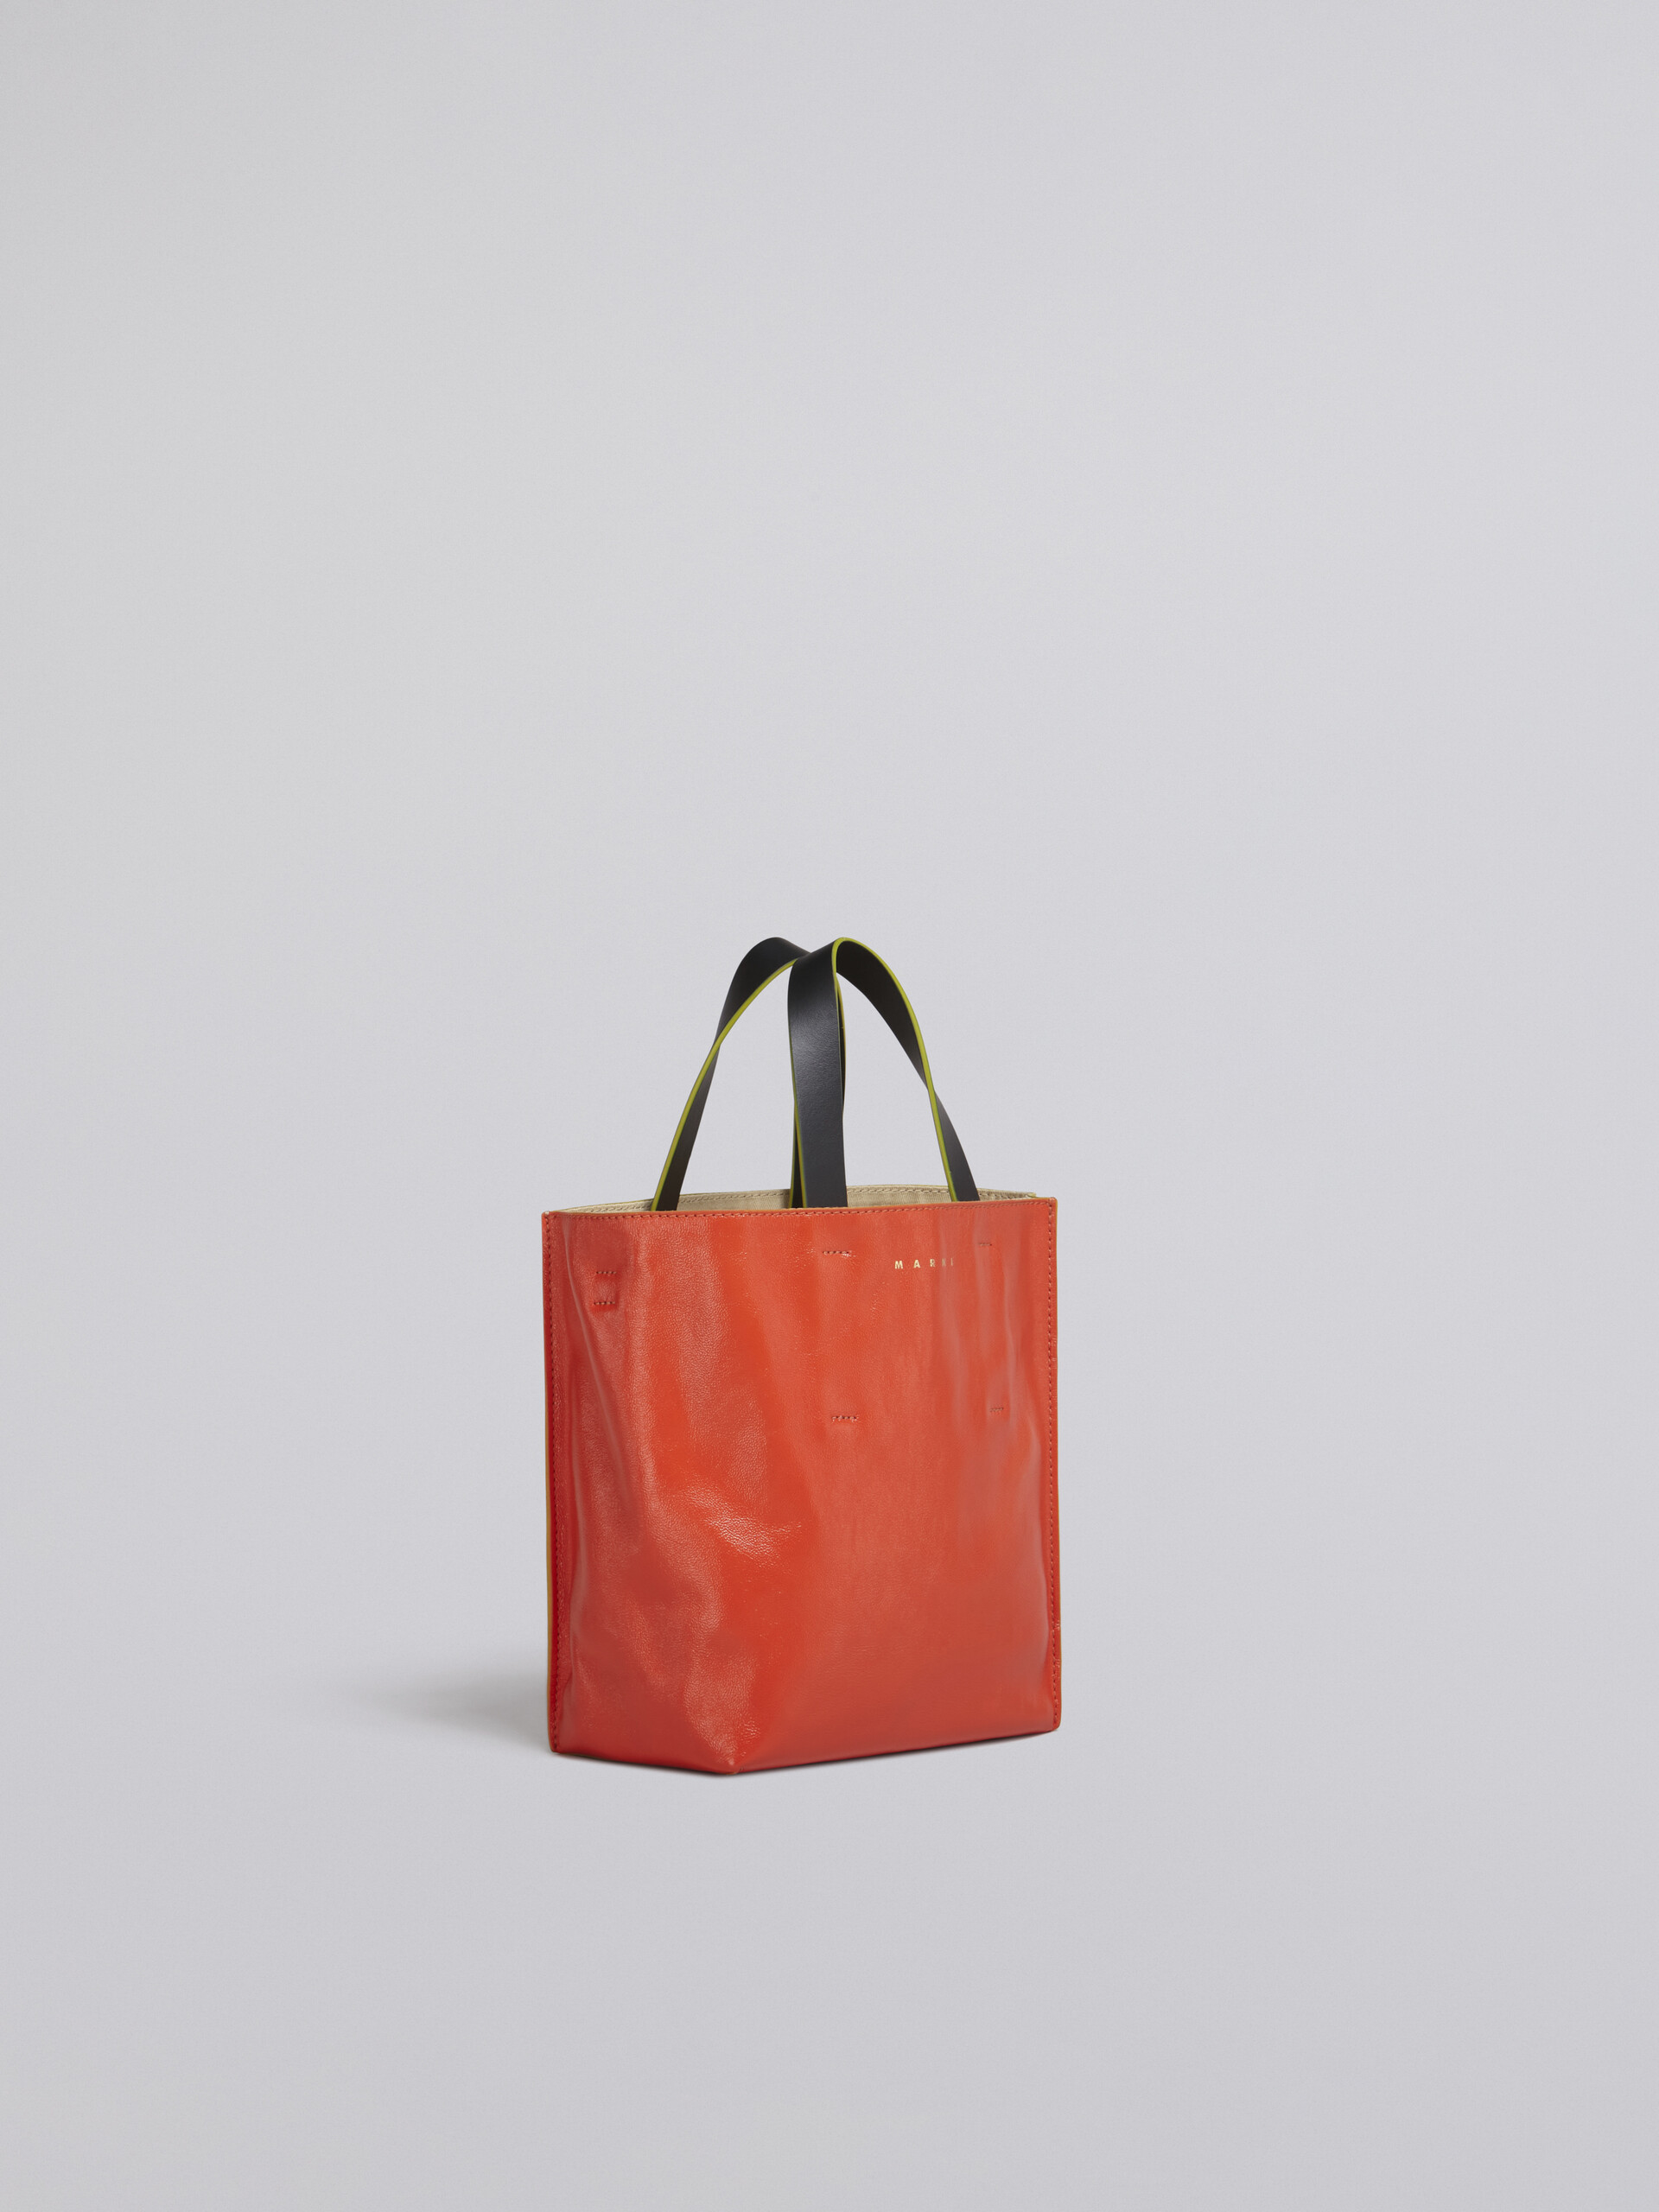 MUSEO SOFT mini bag in beige and orange leather - Shopping Bags - Image 5